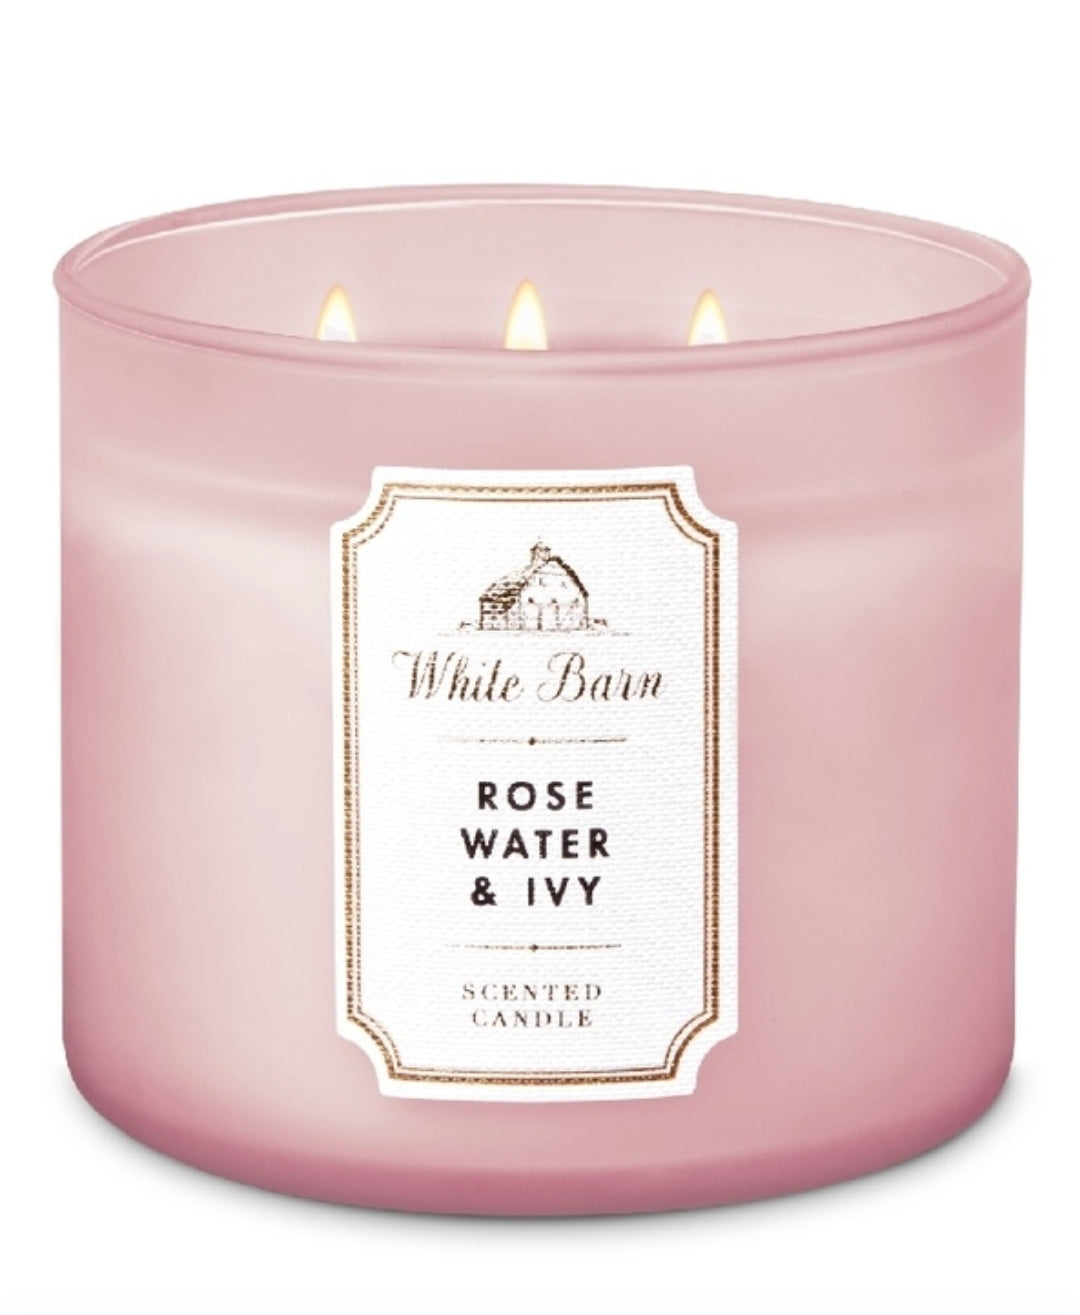 Rose Water & Ivy 3 -Wick Scented Candle